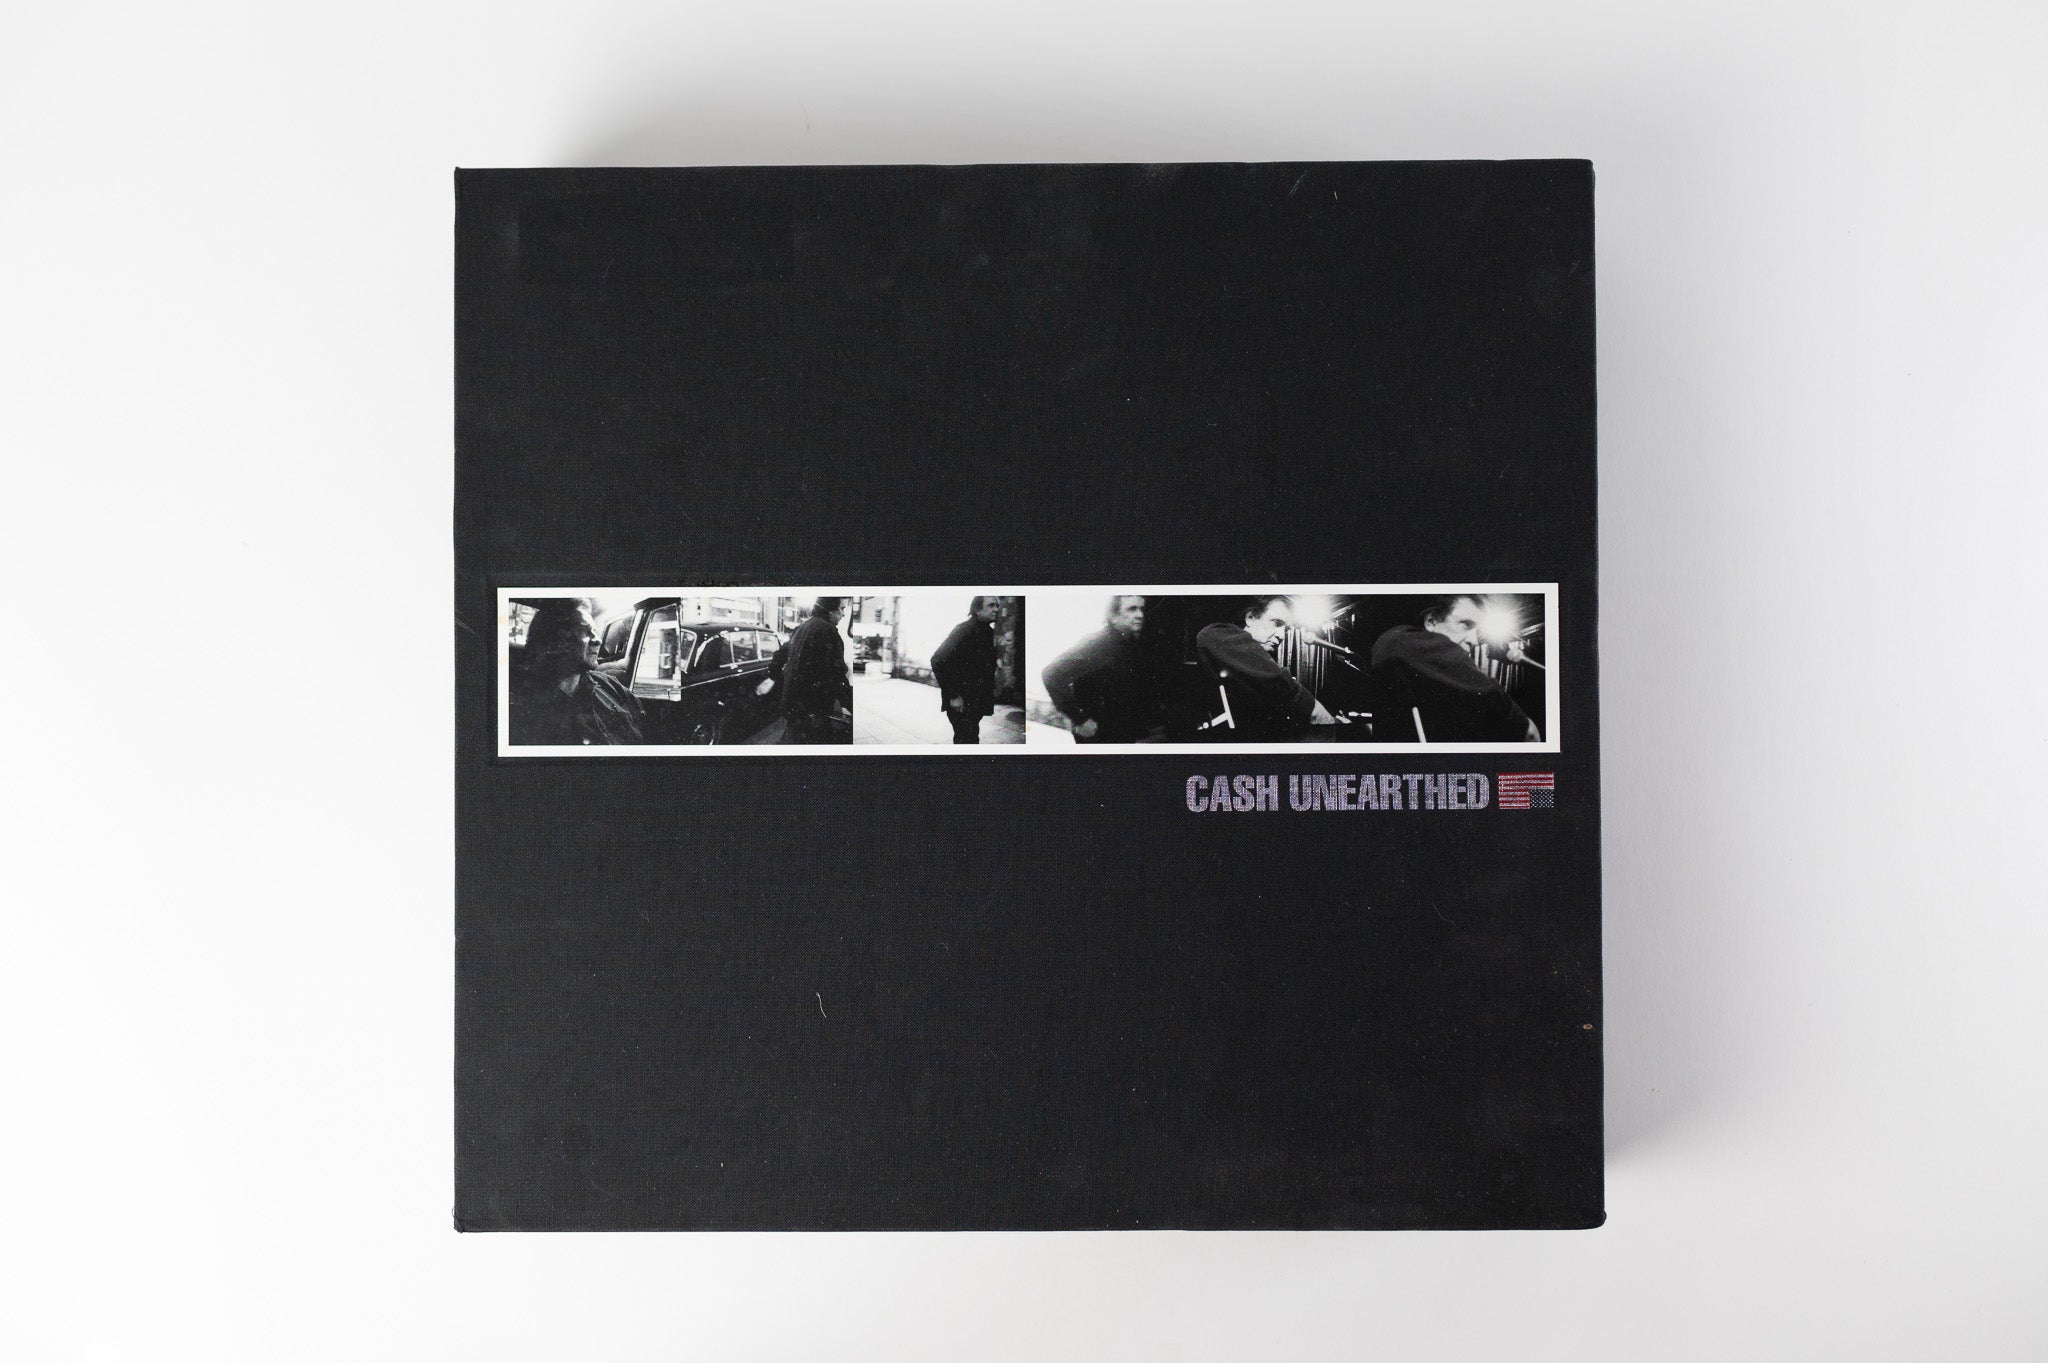 Johnny Cash - Unearthed on American Recordings Ltd Reissue Box Set